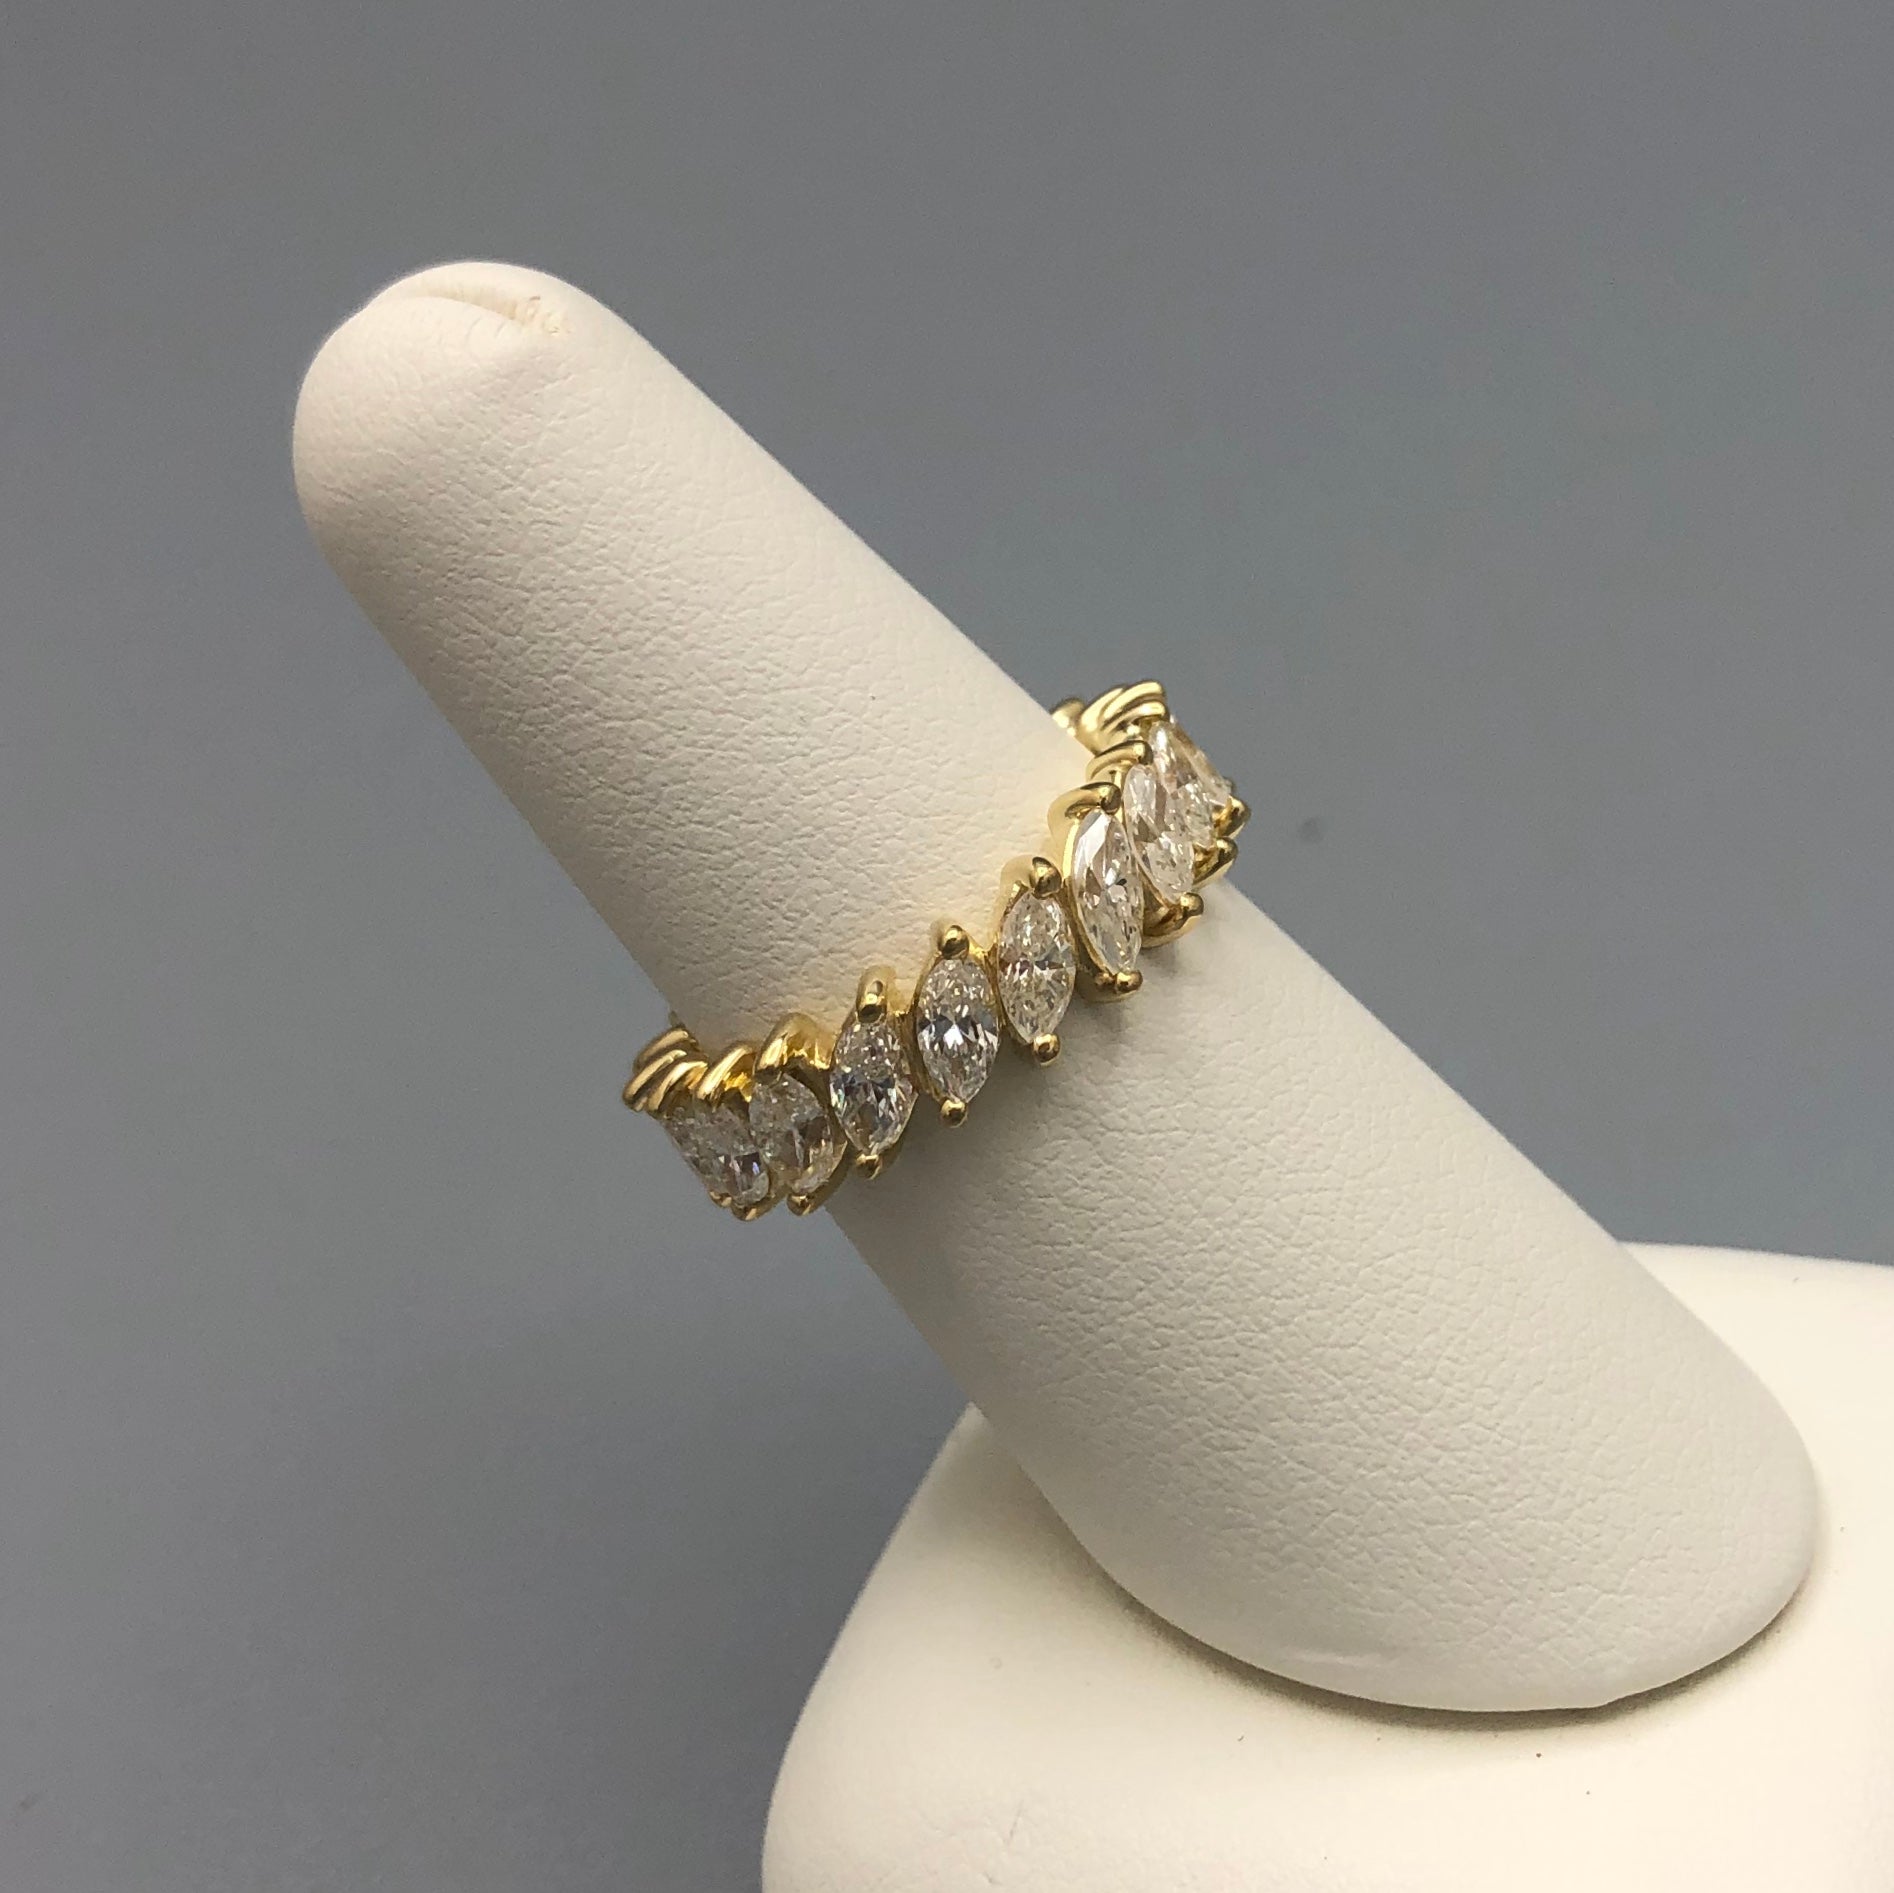 Marquise Cut Diamond Eternity Band with 20 diamonds set in 18k yellow gold